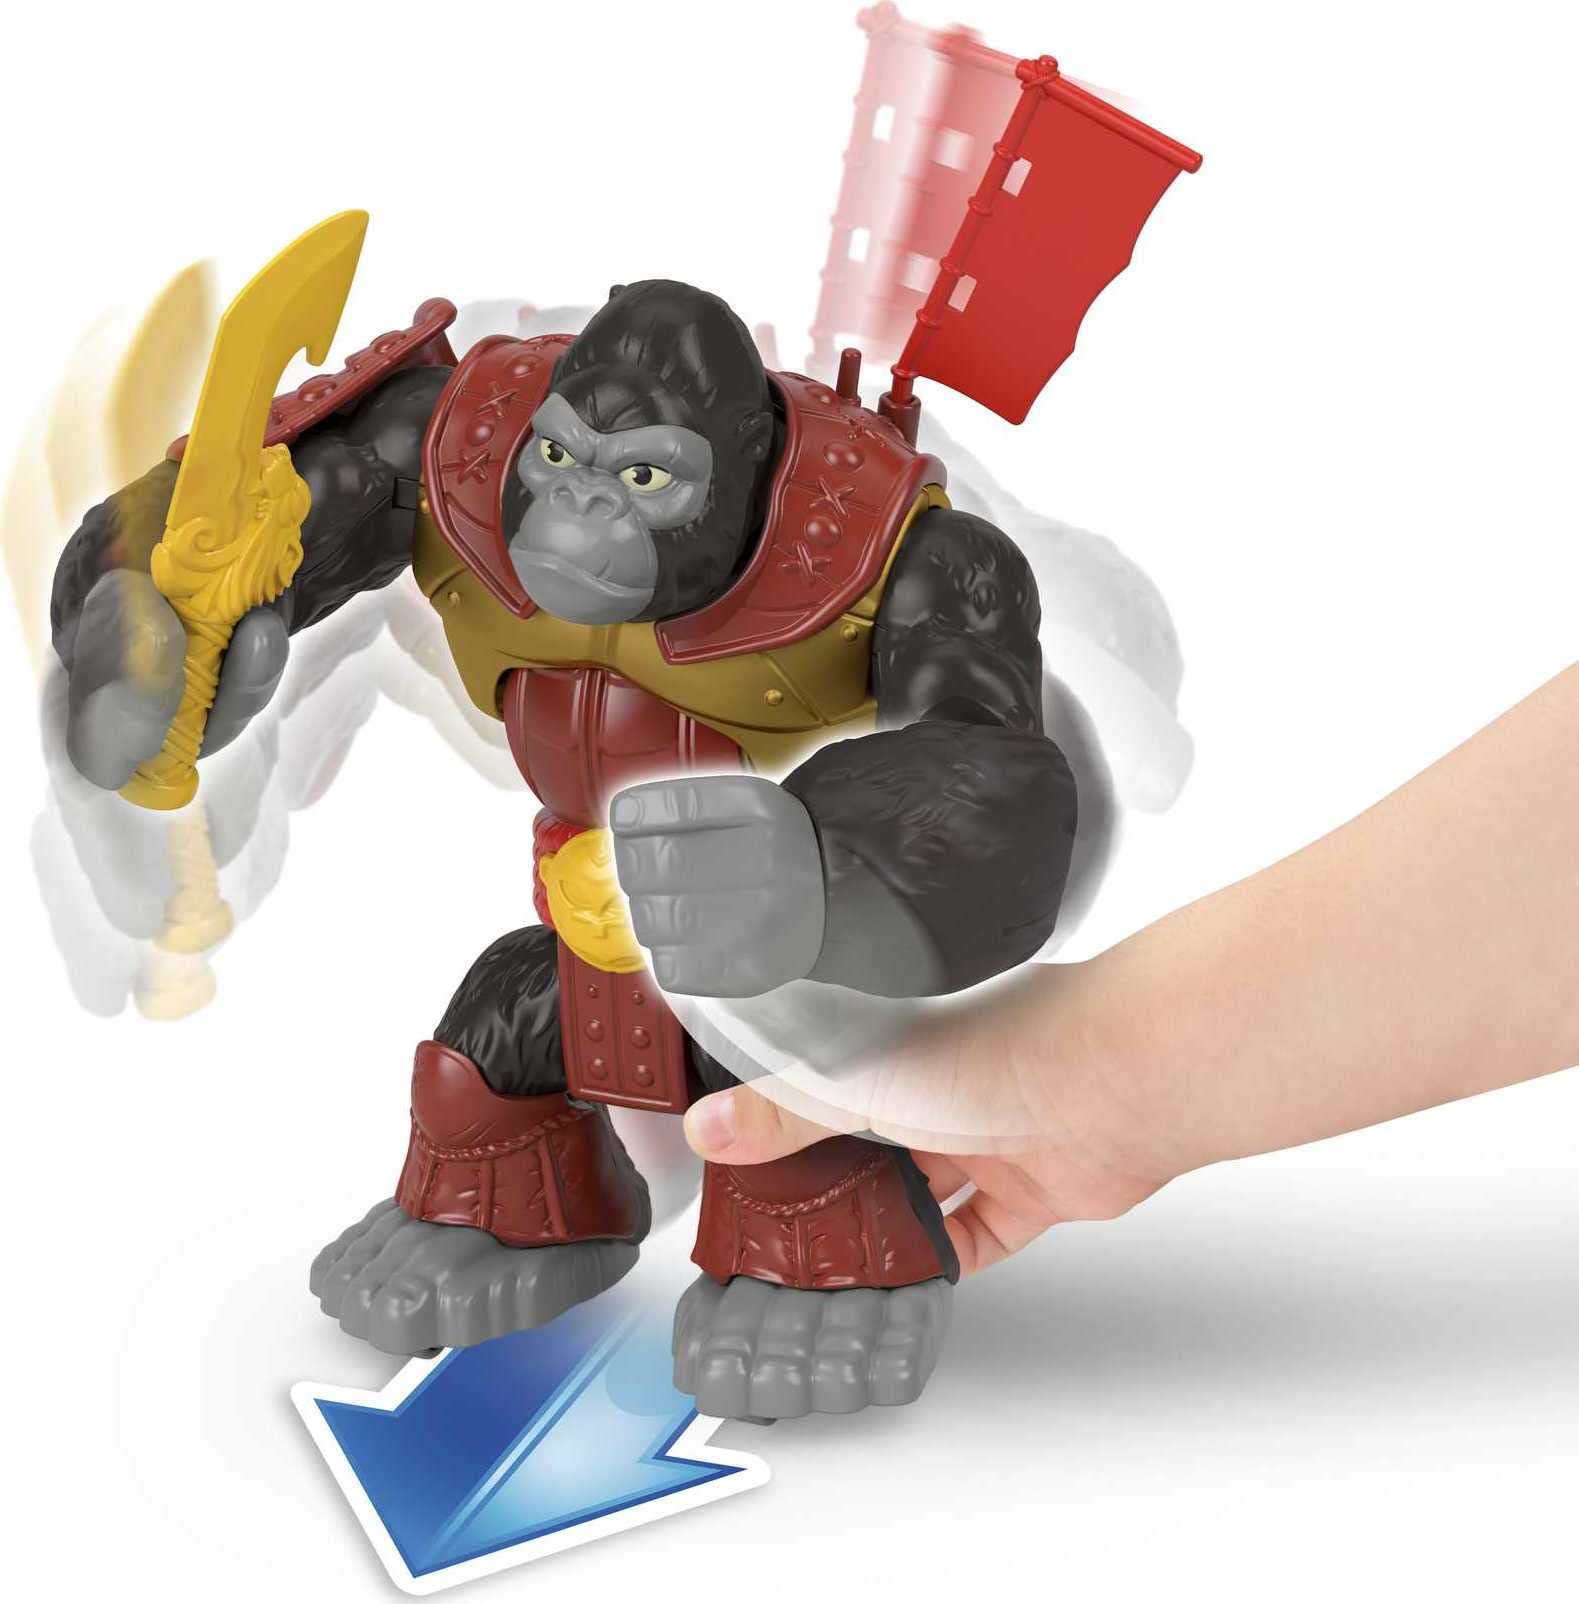 Imaginext Preschool Toy Silverback Gorilla Smash 8-In Figure with Punching Action & Accessories for Pretend Play Ages 3+ Years (Amazon Exclusive)